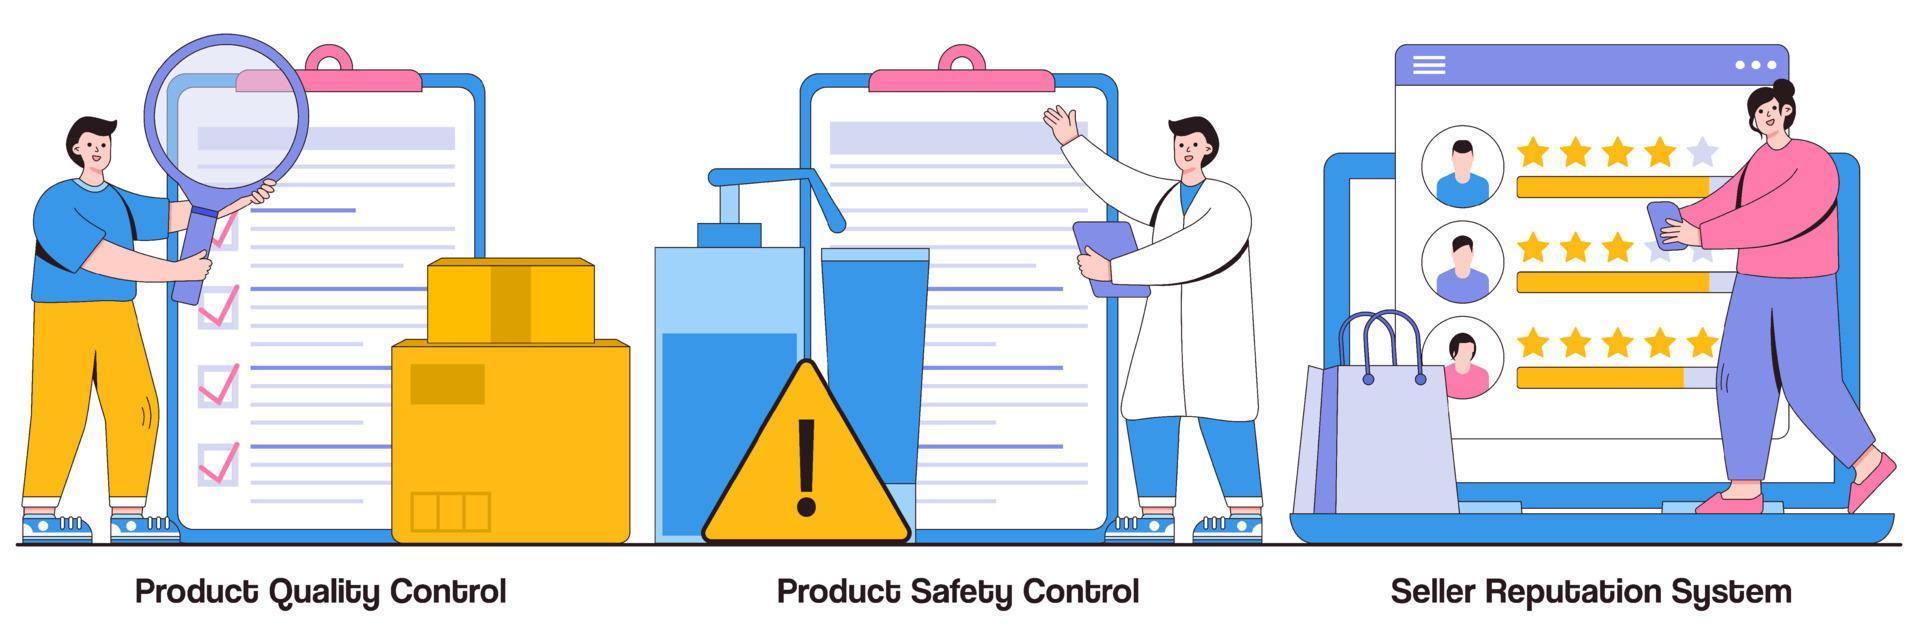 Product Quality and Safety Control, Seller Reputation System with People Characters Illustrations Pack vector